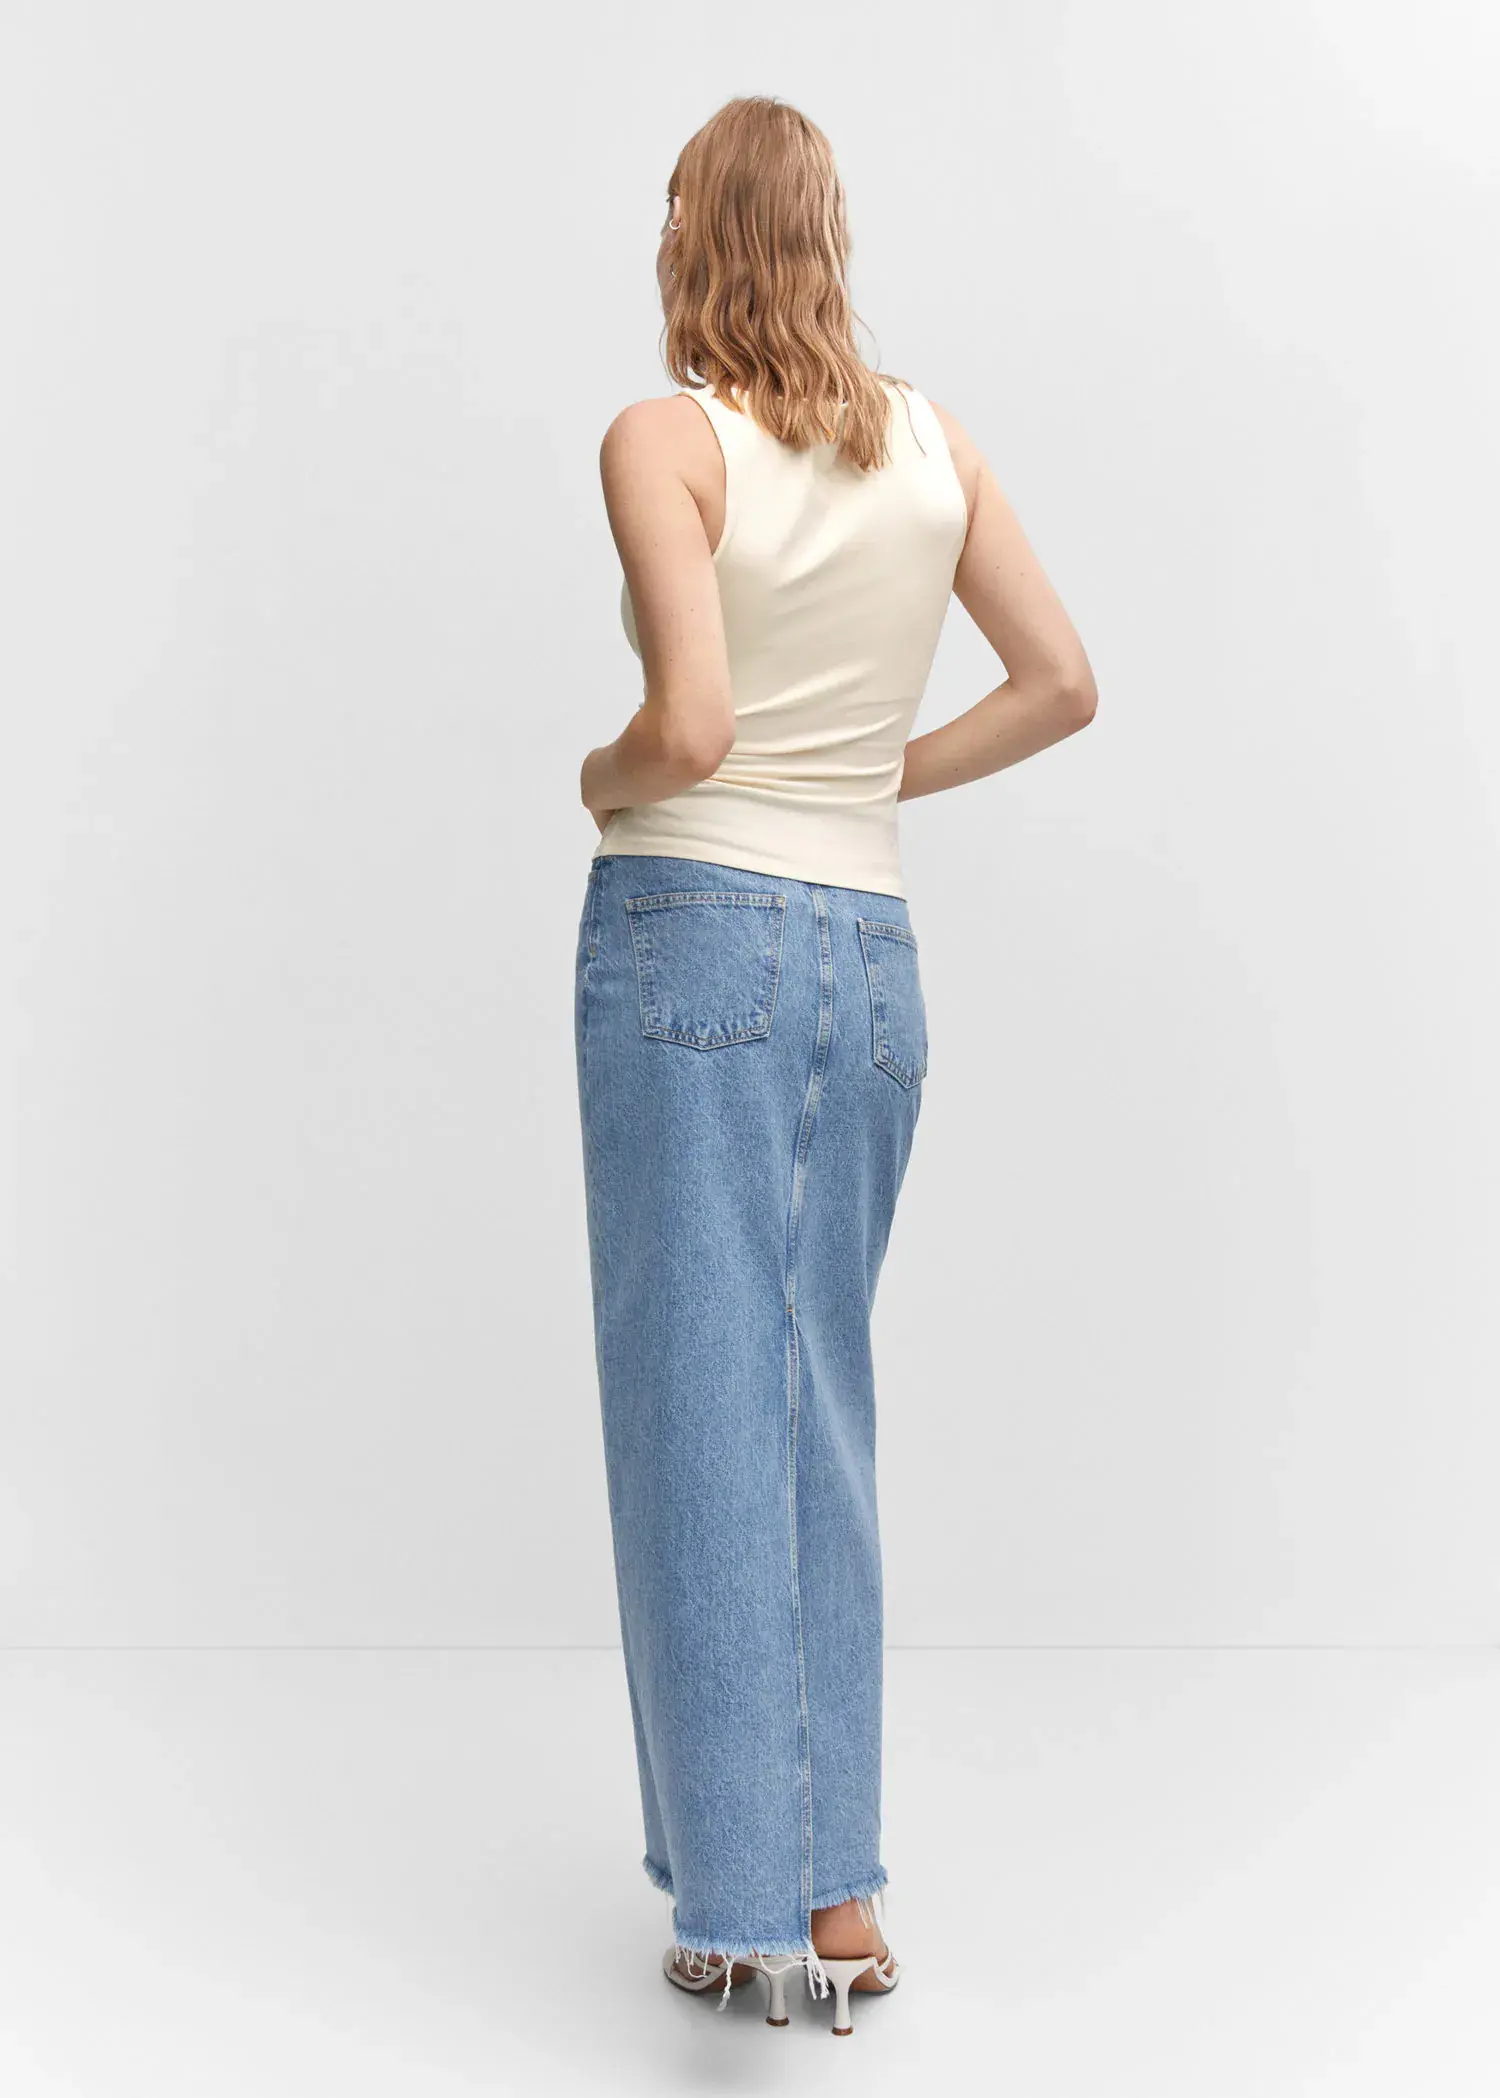 Mango Open elastic top. a woman in a white shirt and blue jeans. 